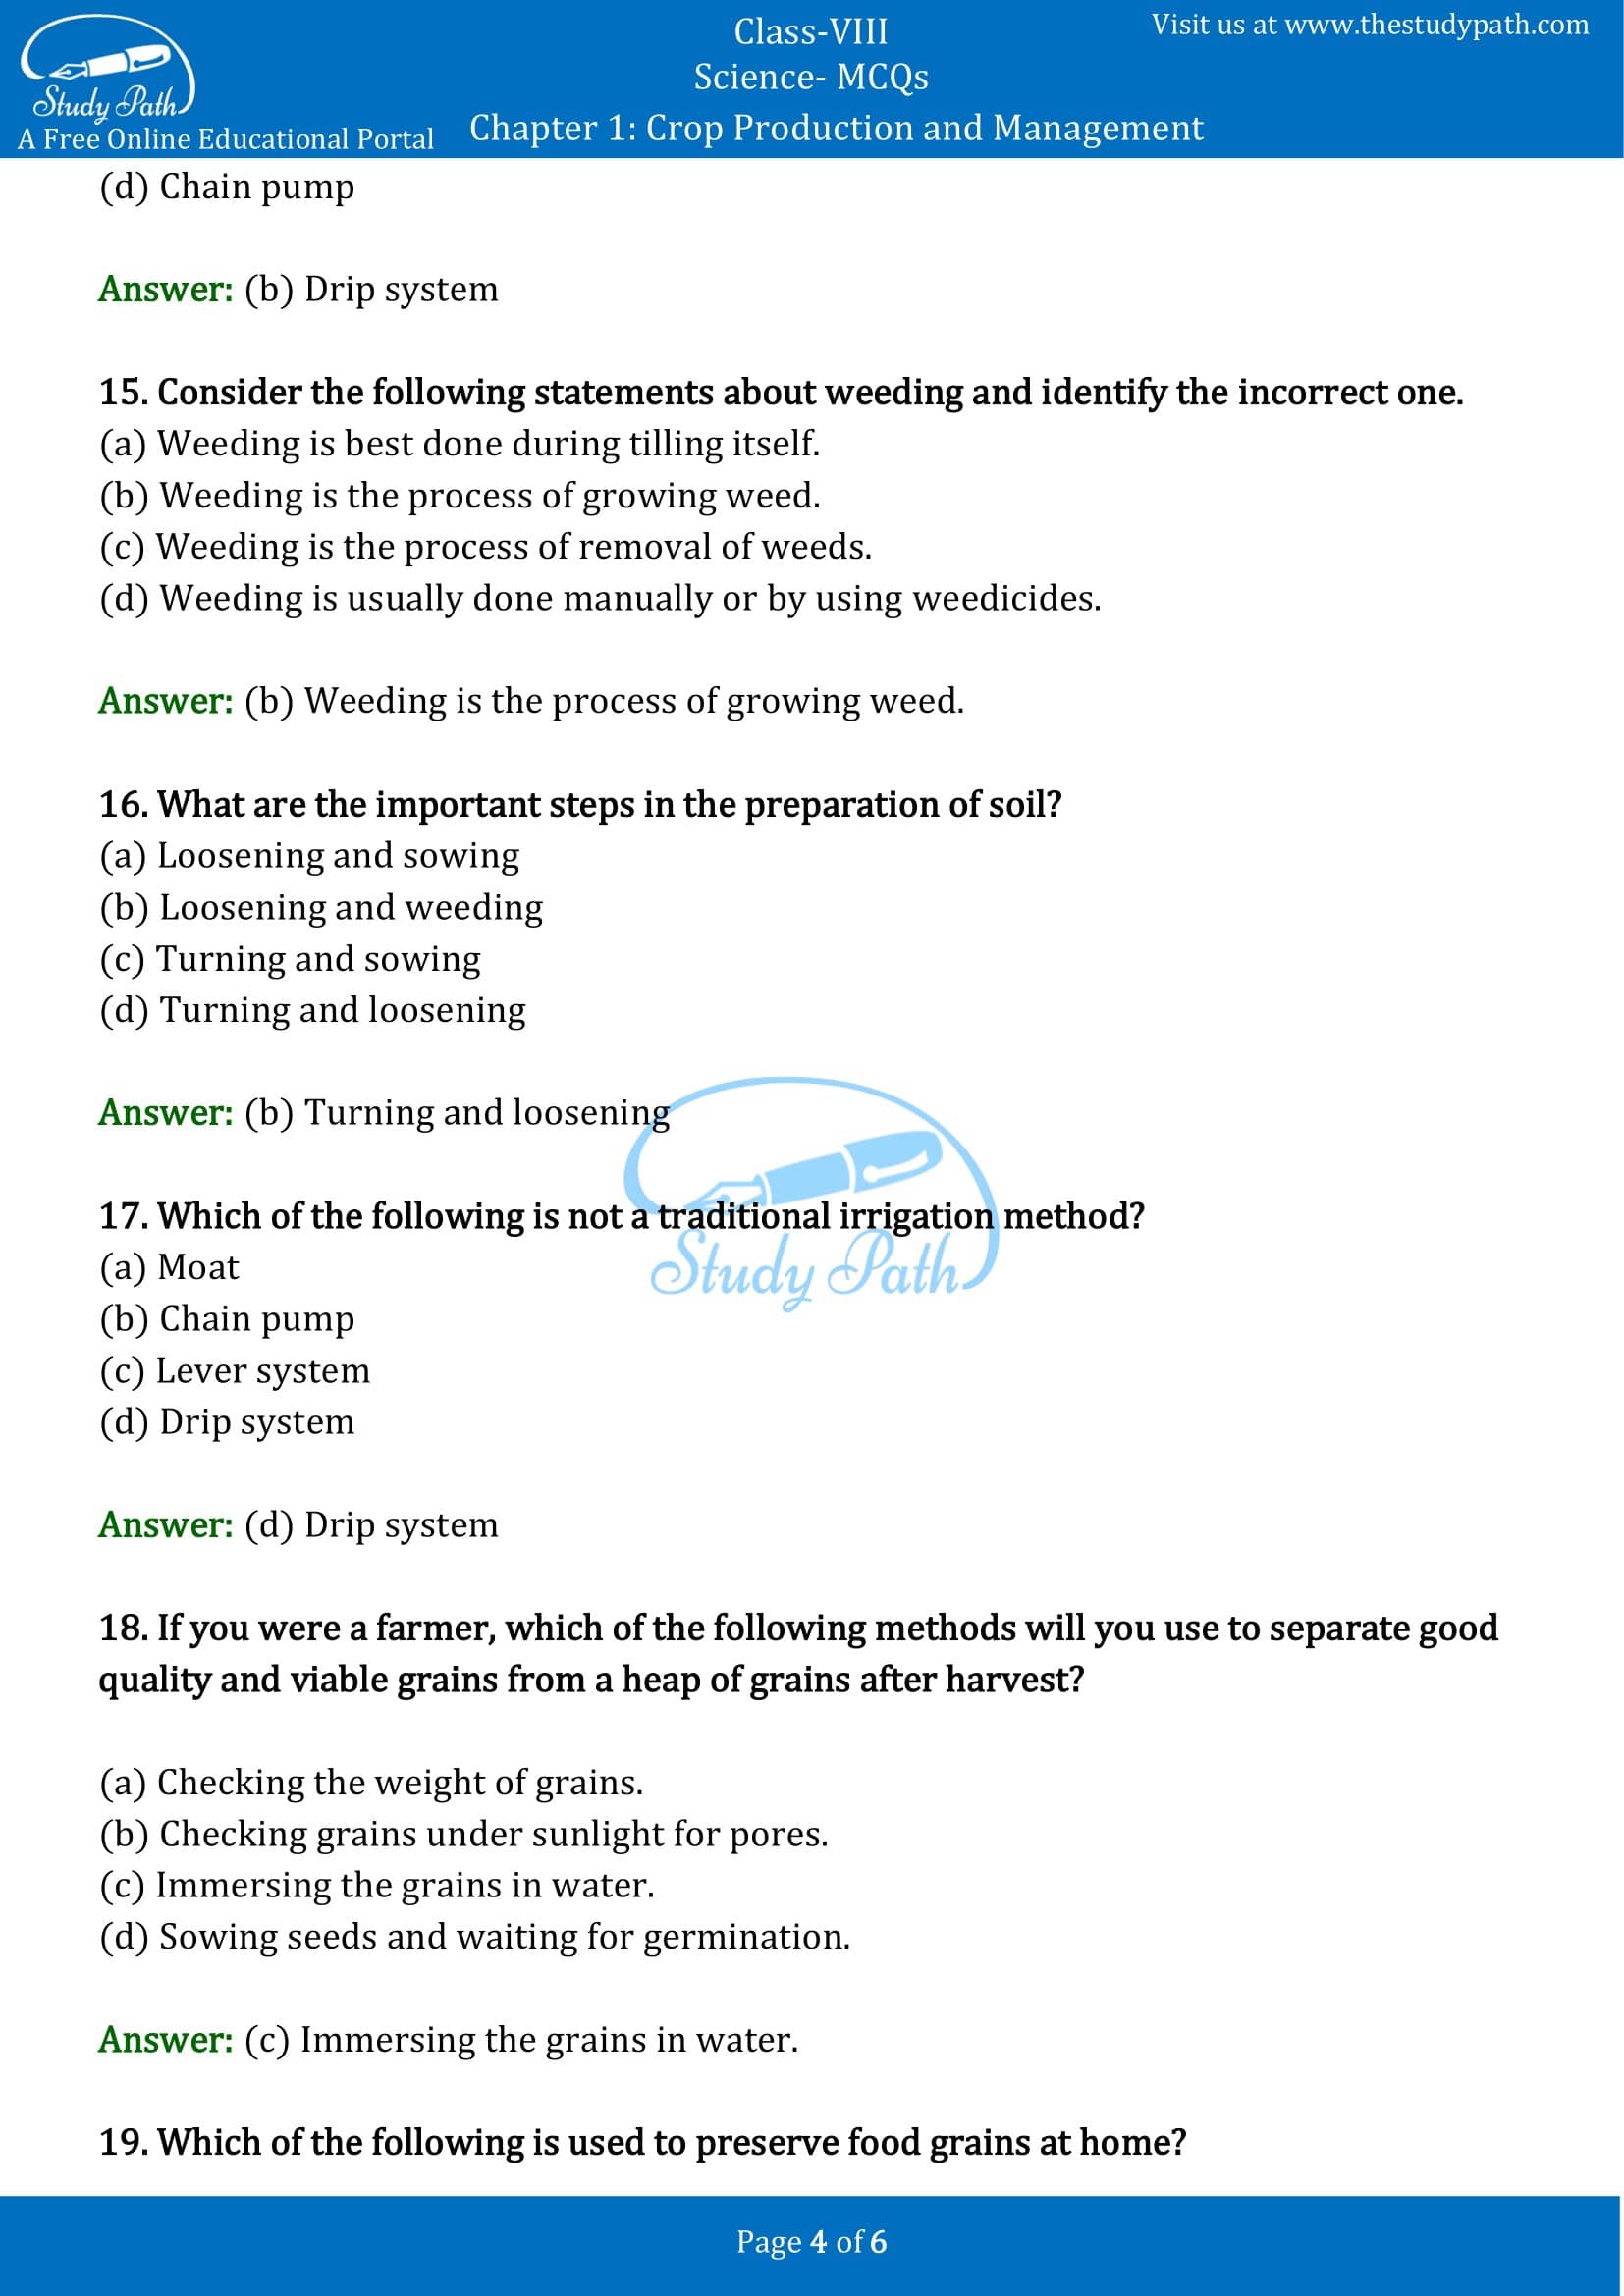 case study questions of class 8 science